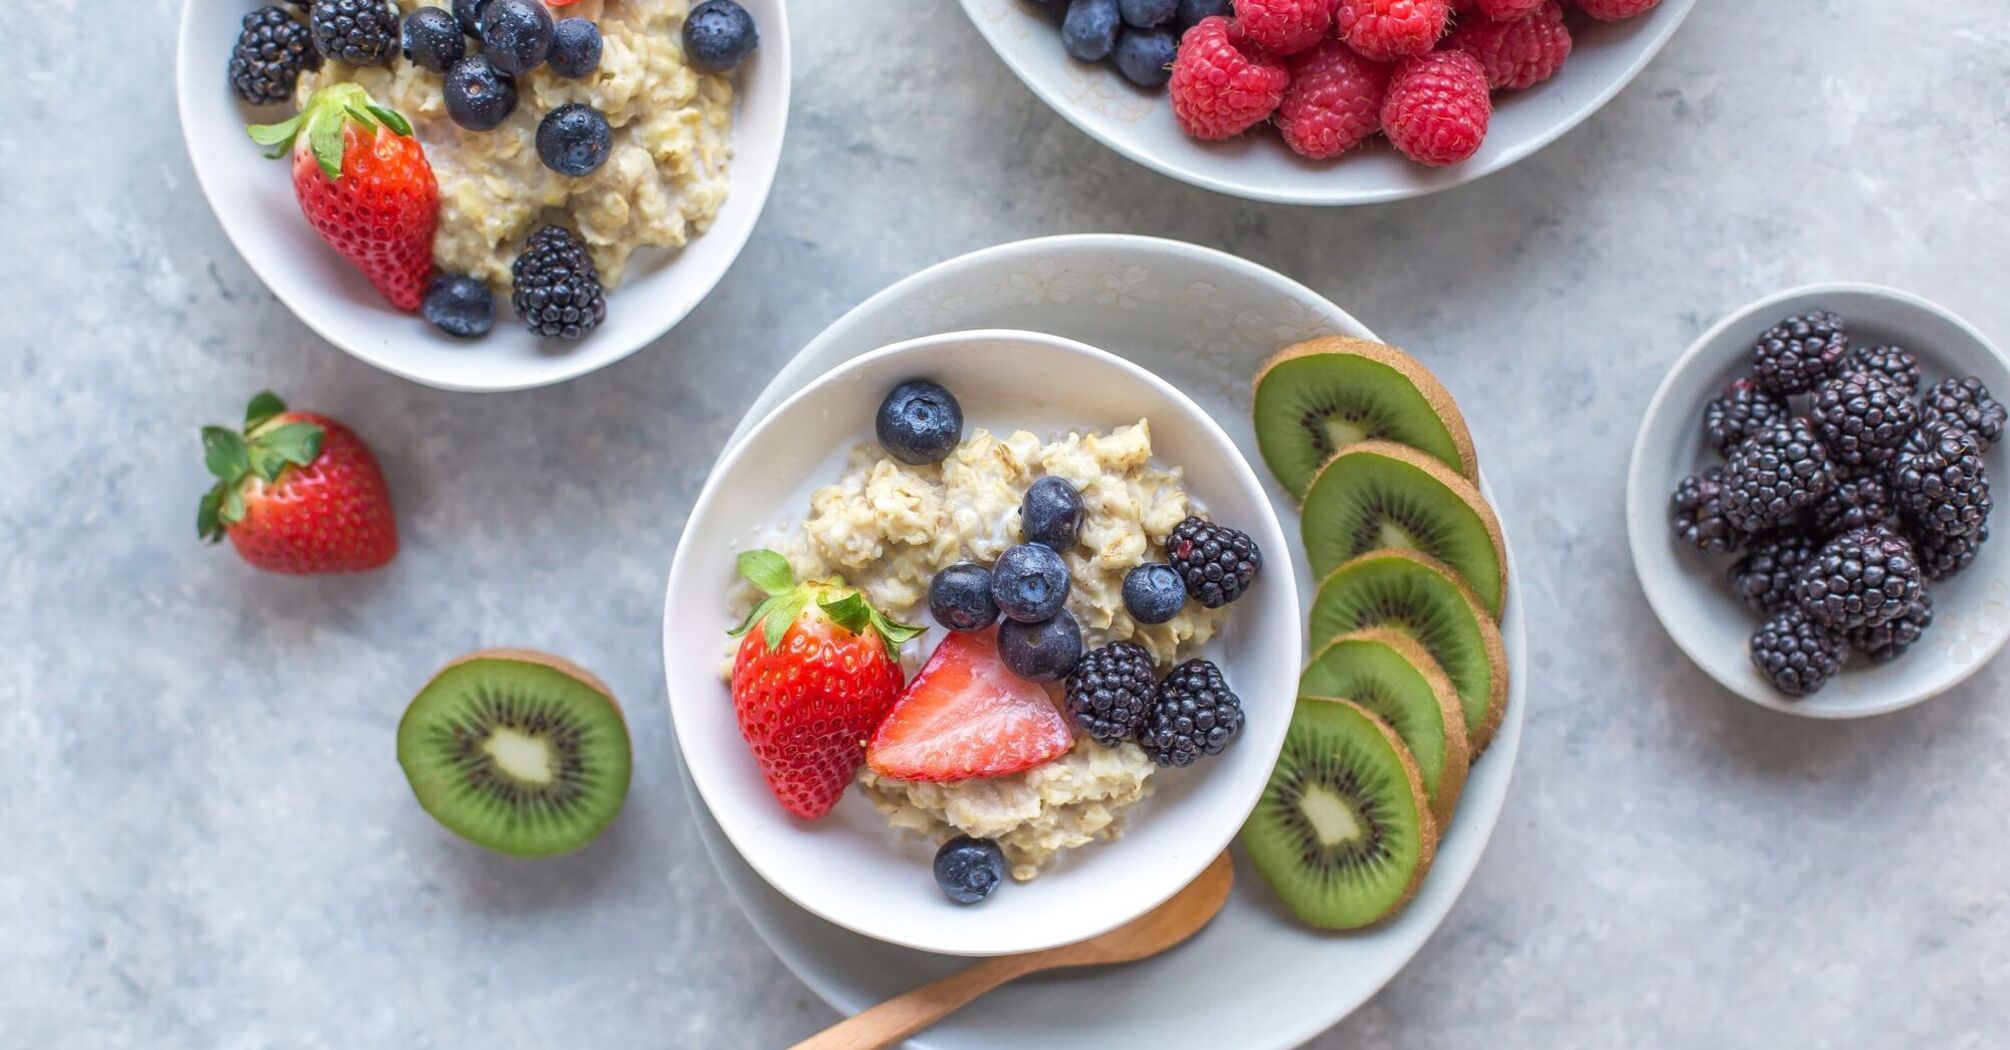 It will be ready overnight: How to cook a quick and nutritious breakfast with oatmeal